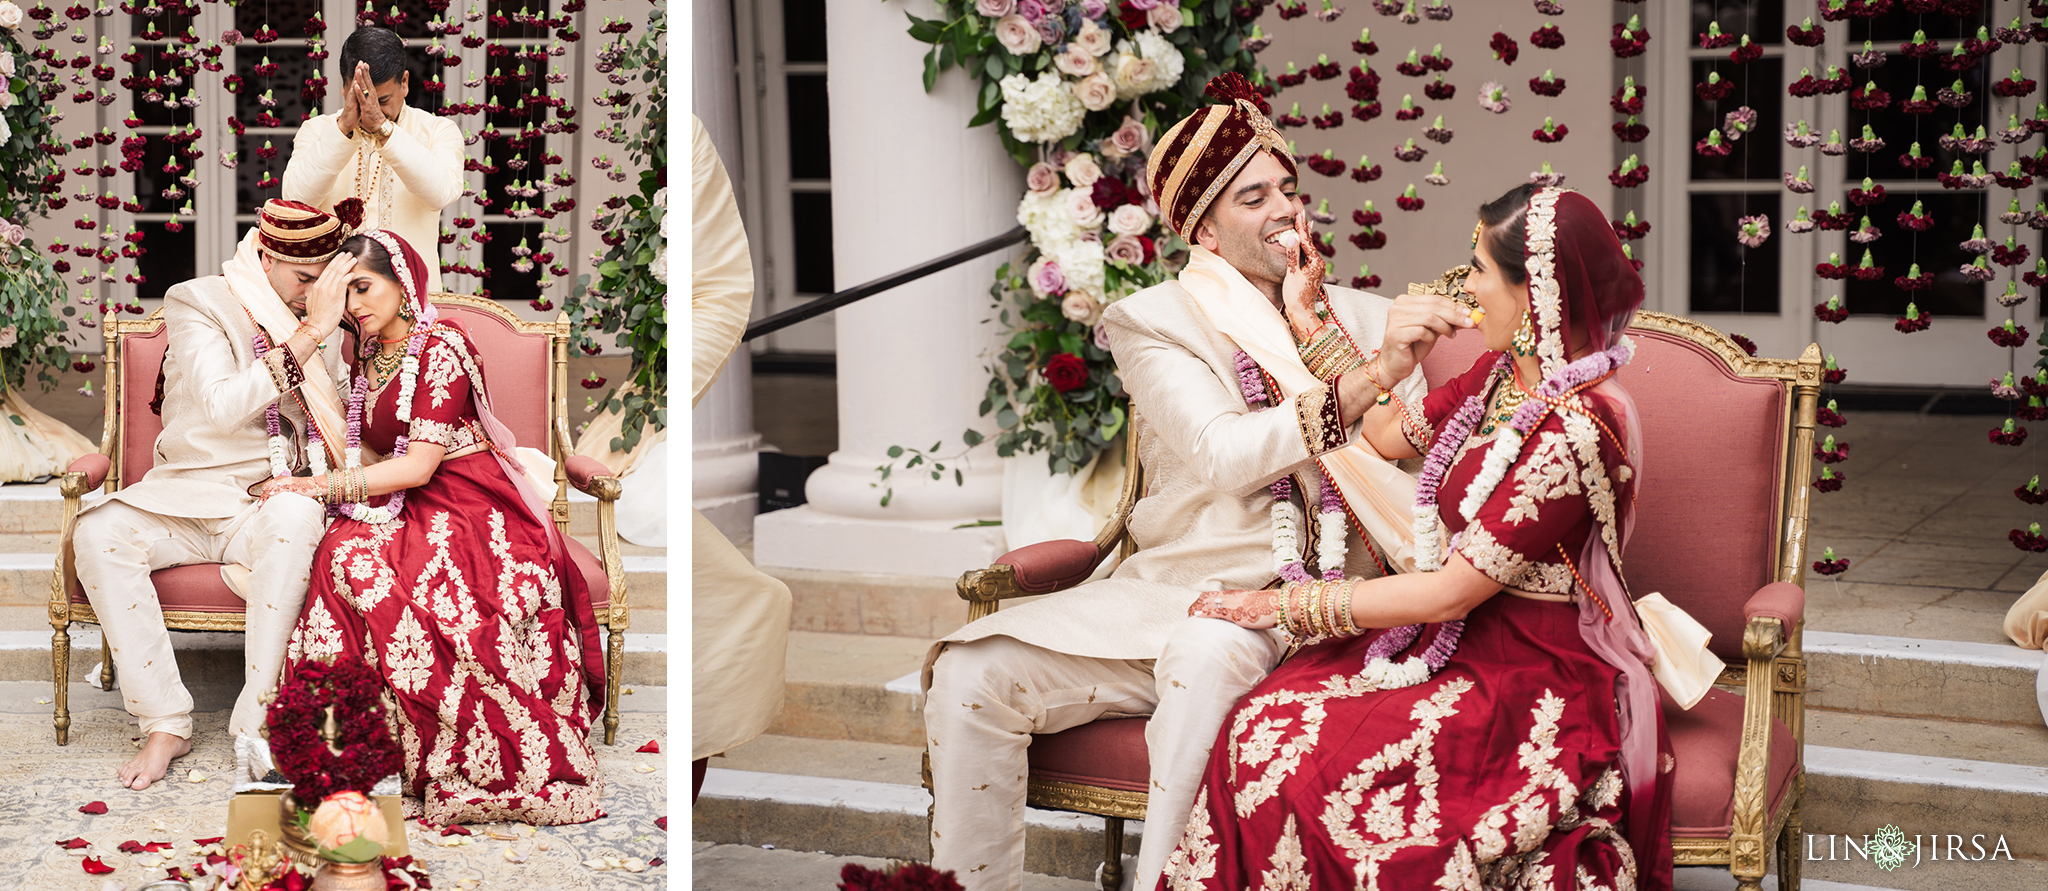 26 The Ebell Los Angeles Indian Wedding Ceremony Photography